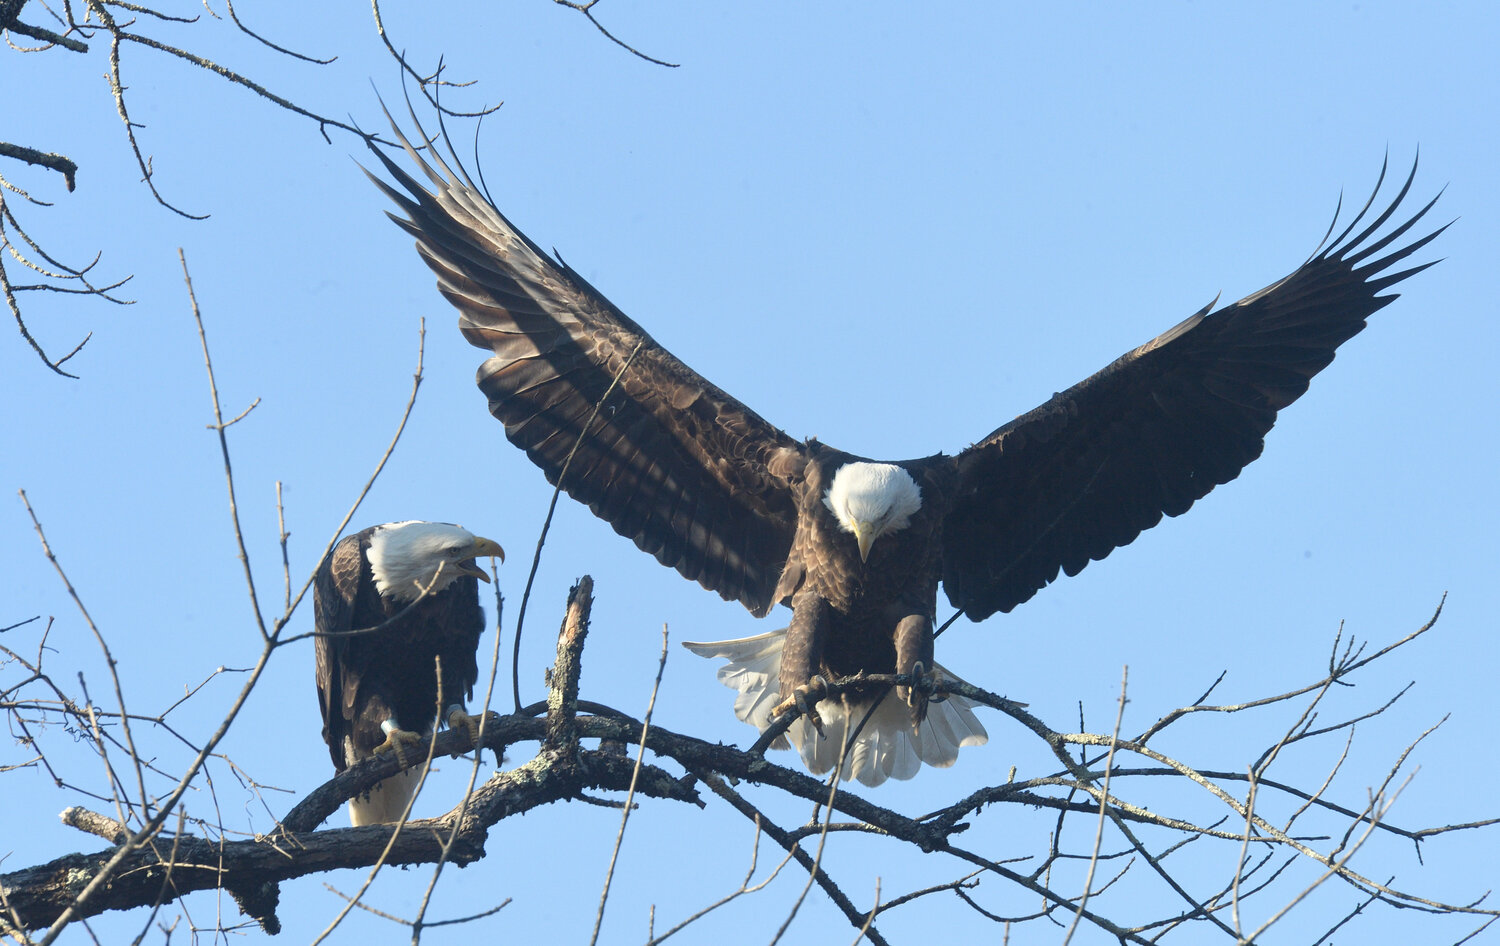 The female eagle (the rightmost with outstretched wings) is landing to join the male of the pair. Bald eagles are sexually dimorphic; females are 20-30 percent larger than males on average. Fall and early winter are quiet times for breeding eagles: the fledglings from last spring and summer have dispersed and are on their own, though adults occasionally engage in nest repair. ..Adult eagles are tolerant of adults from other territories this time of year and can frequently be seen perched in the same tree.....